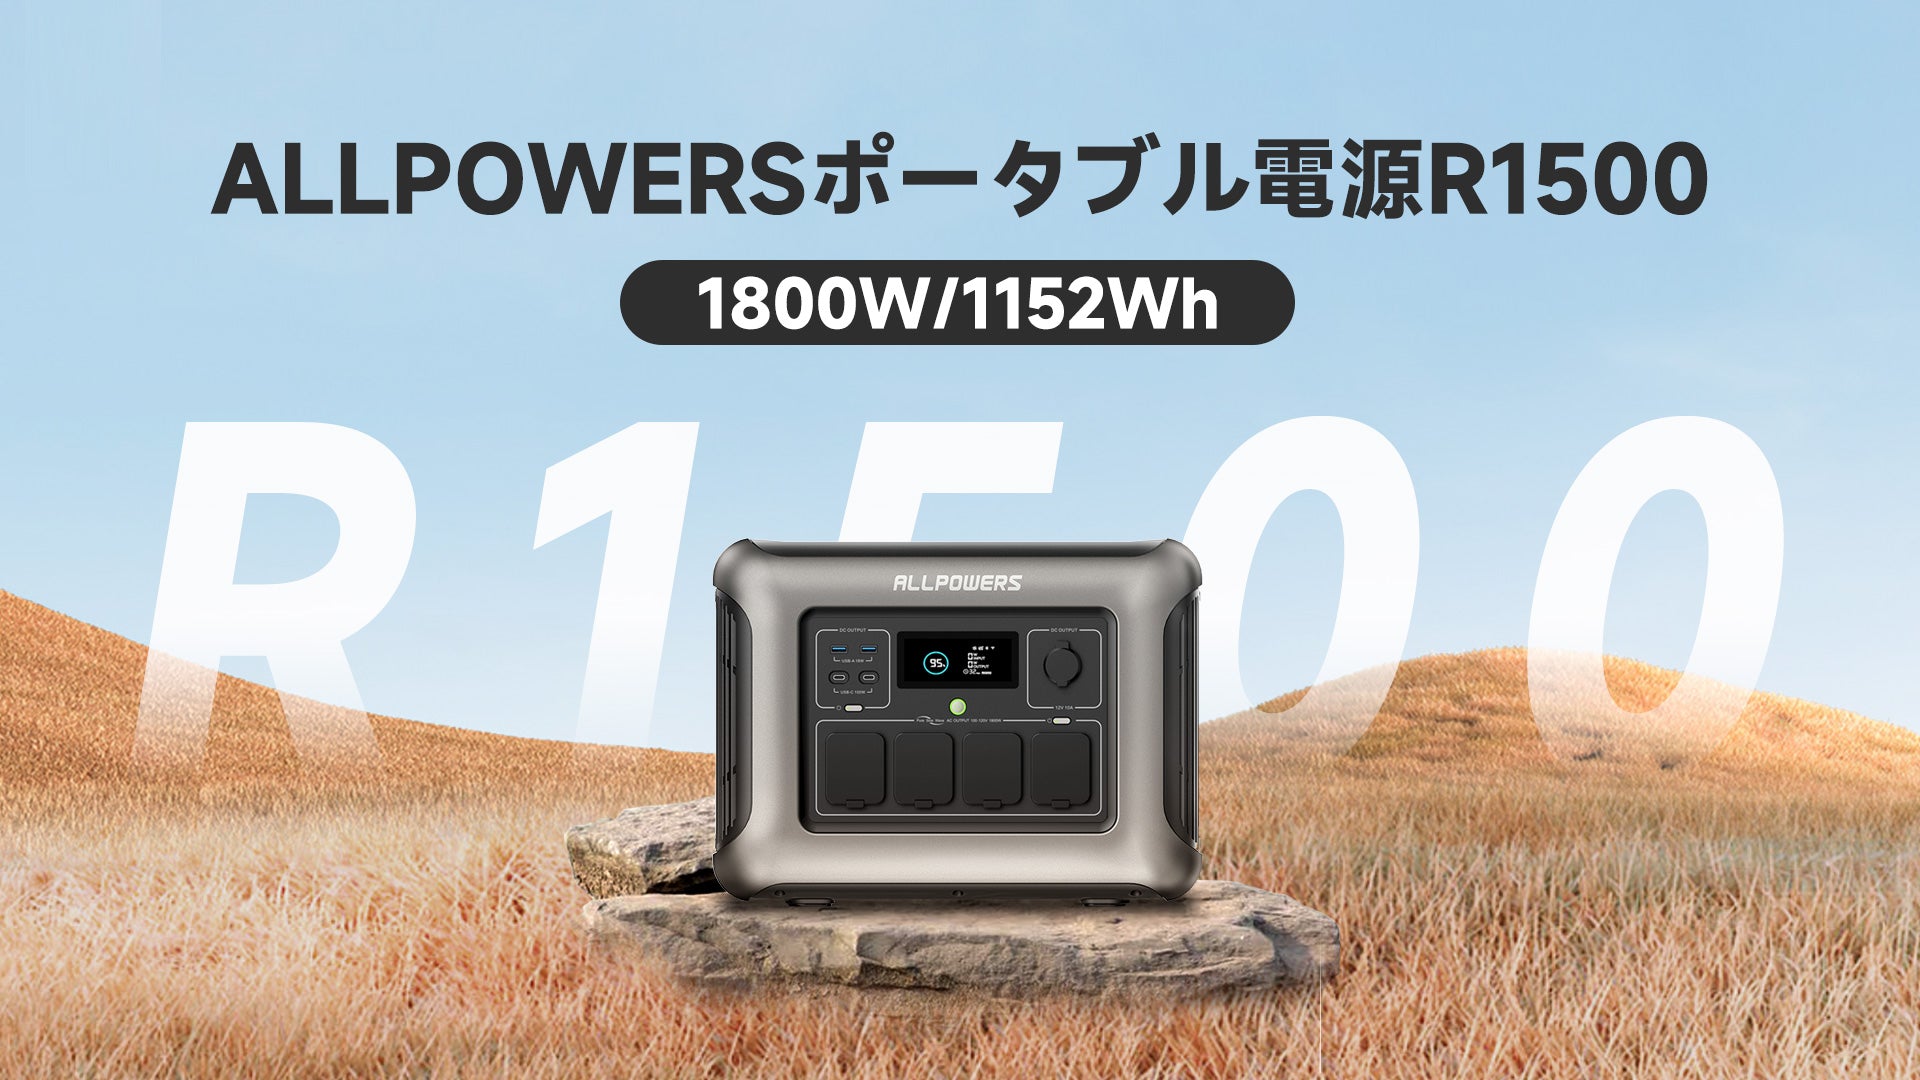 ALLPOWERS大容量ポータブル電源R1500（1152Wh／1800W） – ALLPOWERS 